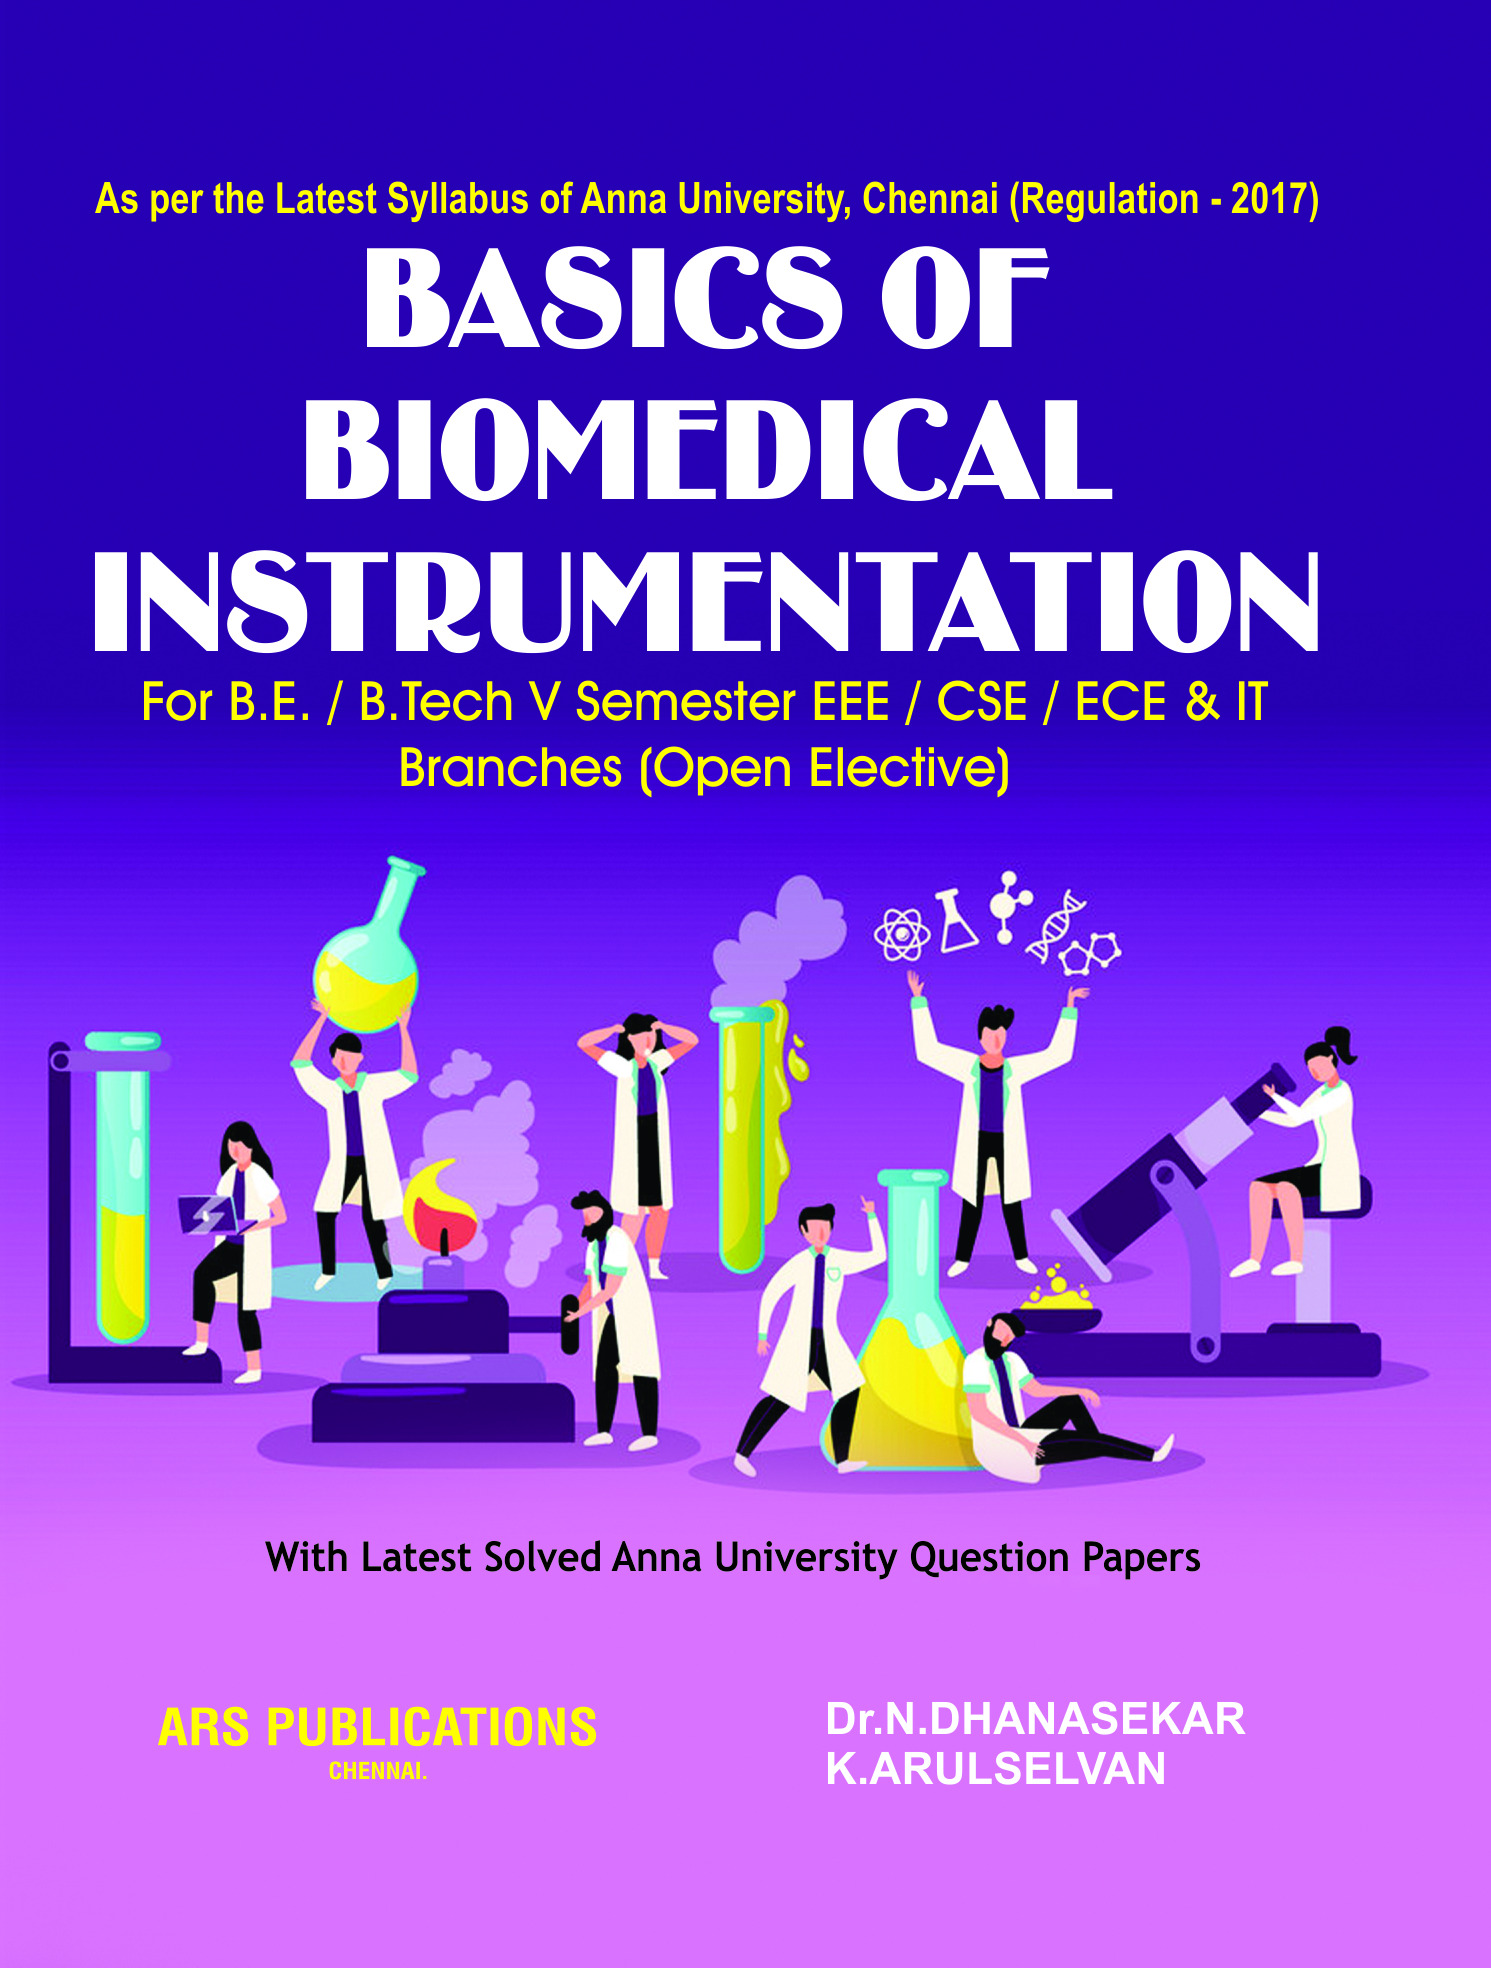 biomedical instrumentation research papers